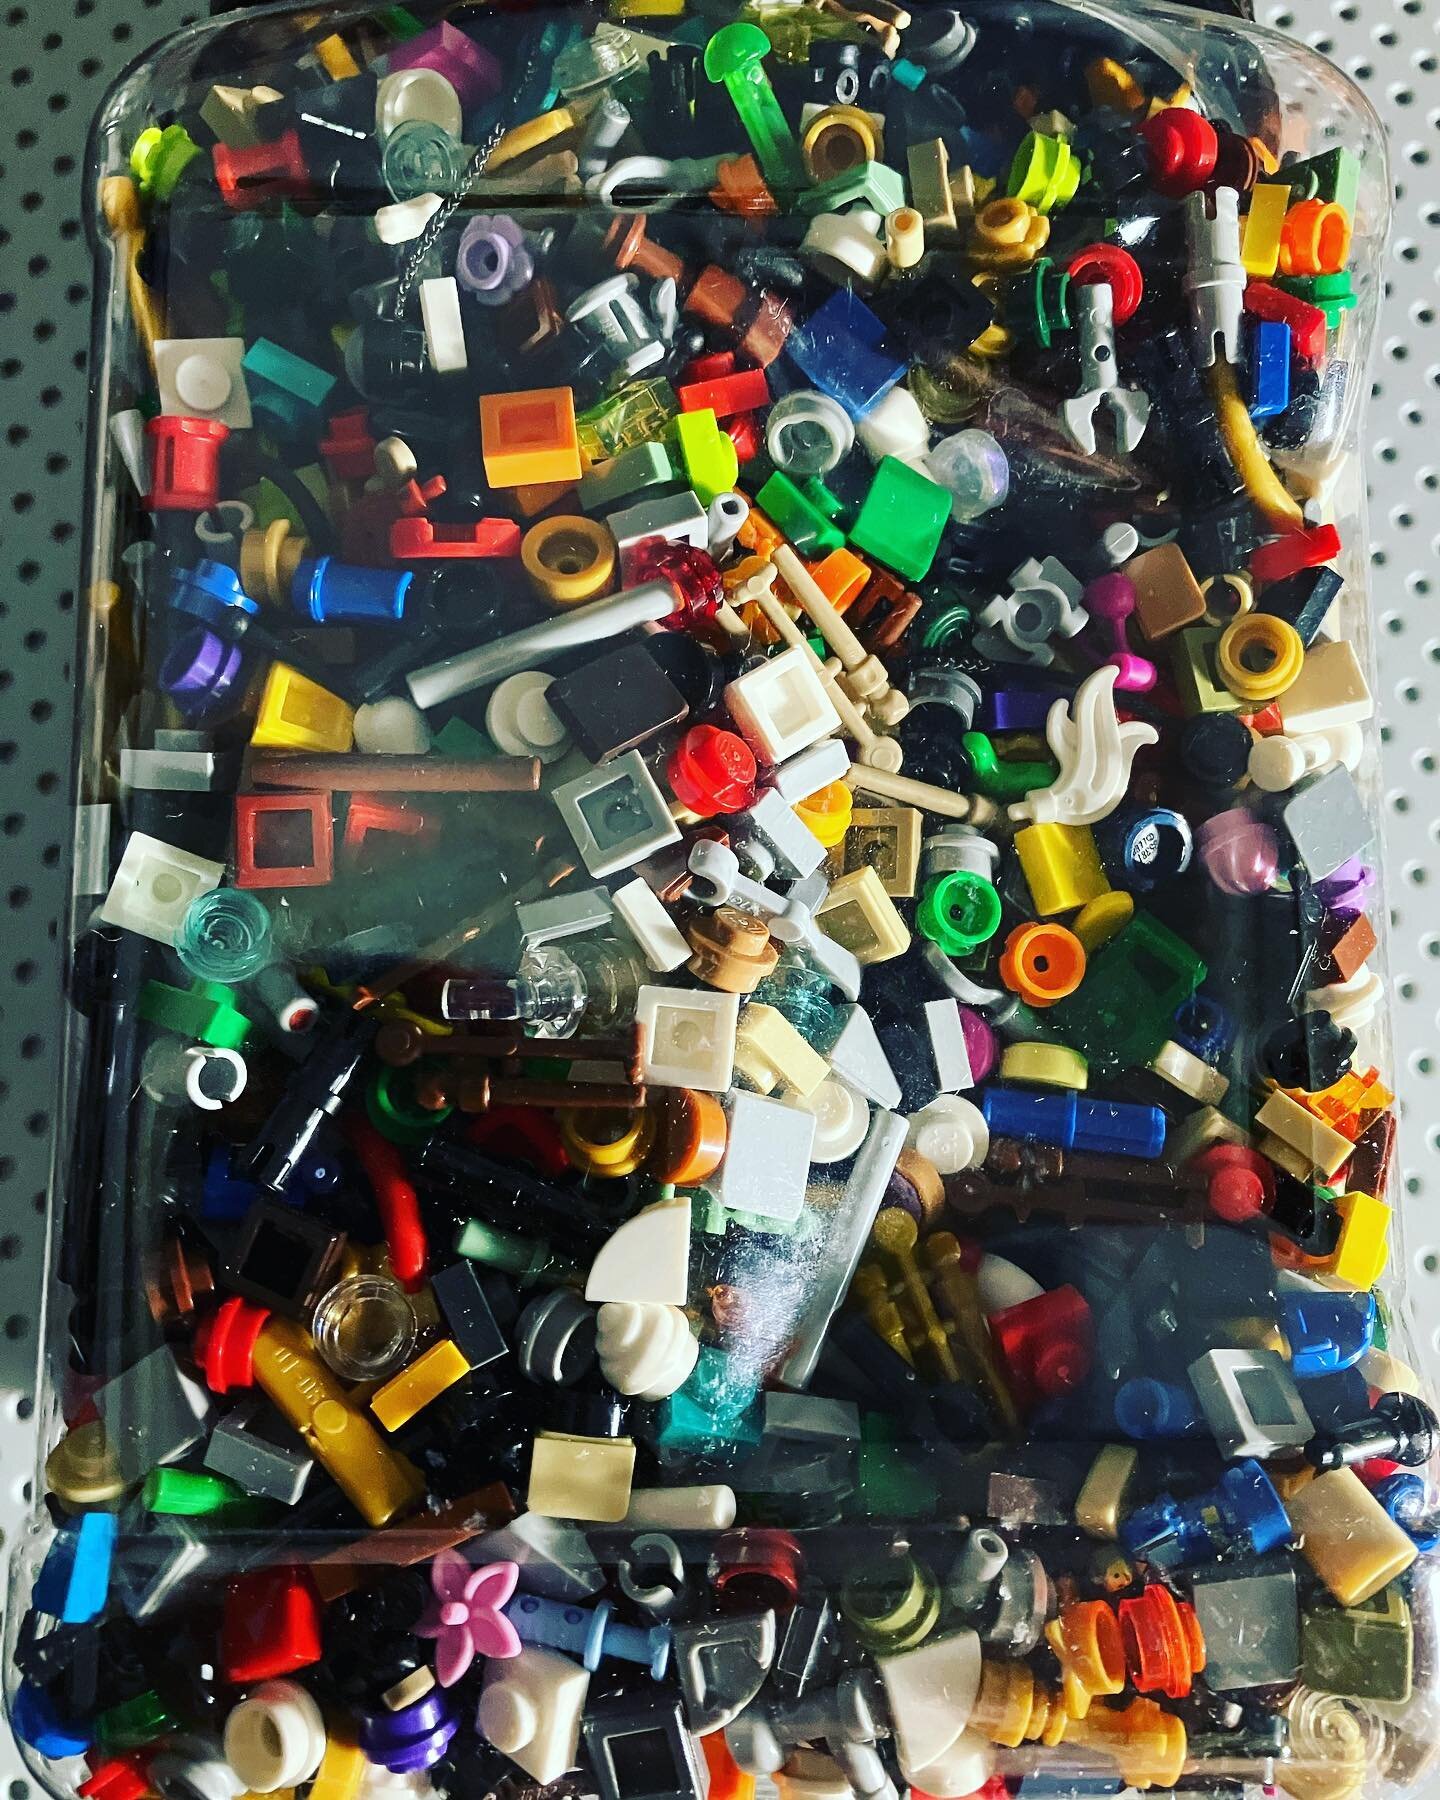 What do you do with all those little parts that come extra in #legosets 🤔Here are a few year&rsquo;s worth of my extra parts.  Any ideas?
#bricksforbricks #bricklinkstore #bricklinkseller #bricklink #legofan